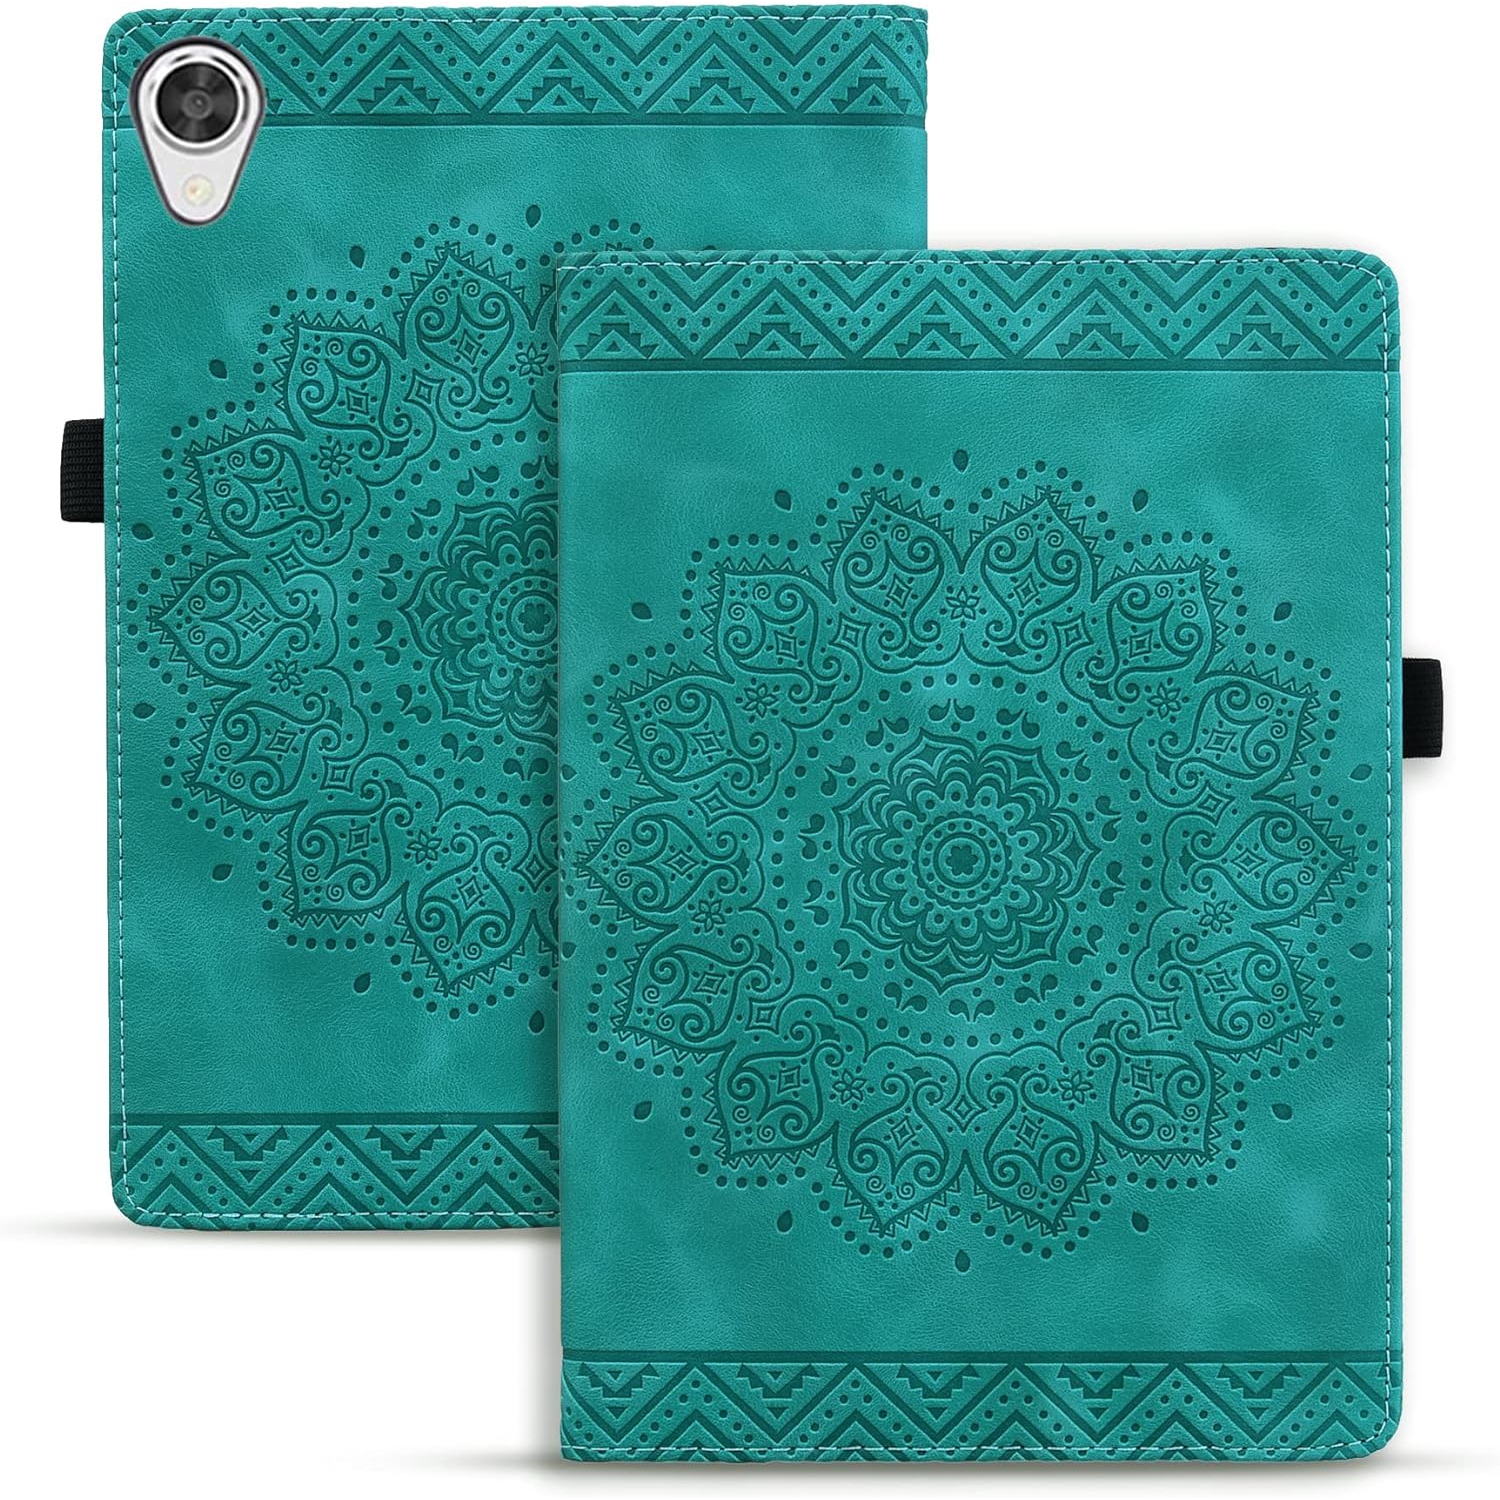 Case for Lenovo Tab M8 HD 8.0 Inch 2019 (TB-8505F/8505X) Tablet, Mandala Embossed Design with Elastic Strap